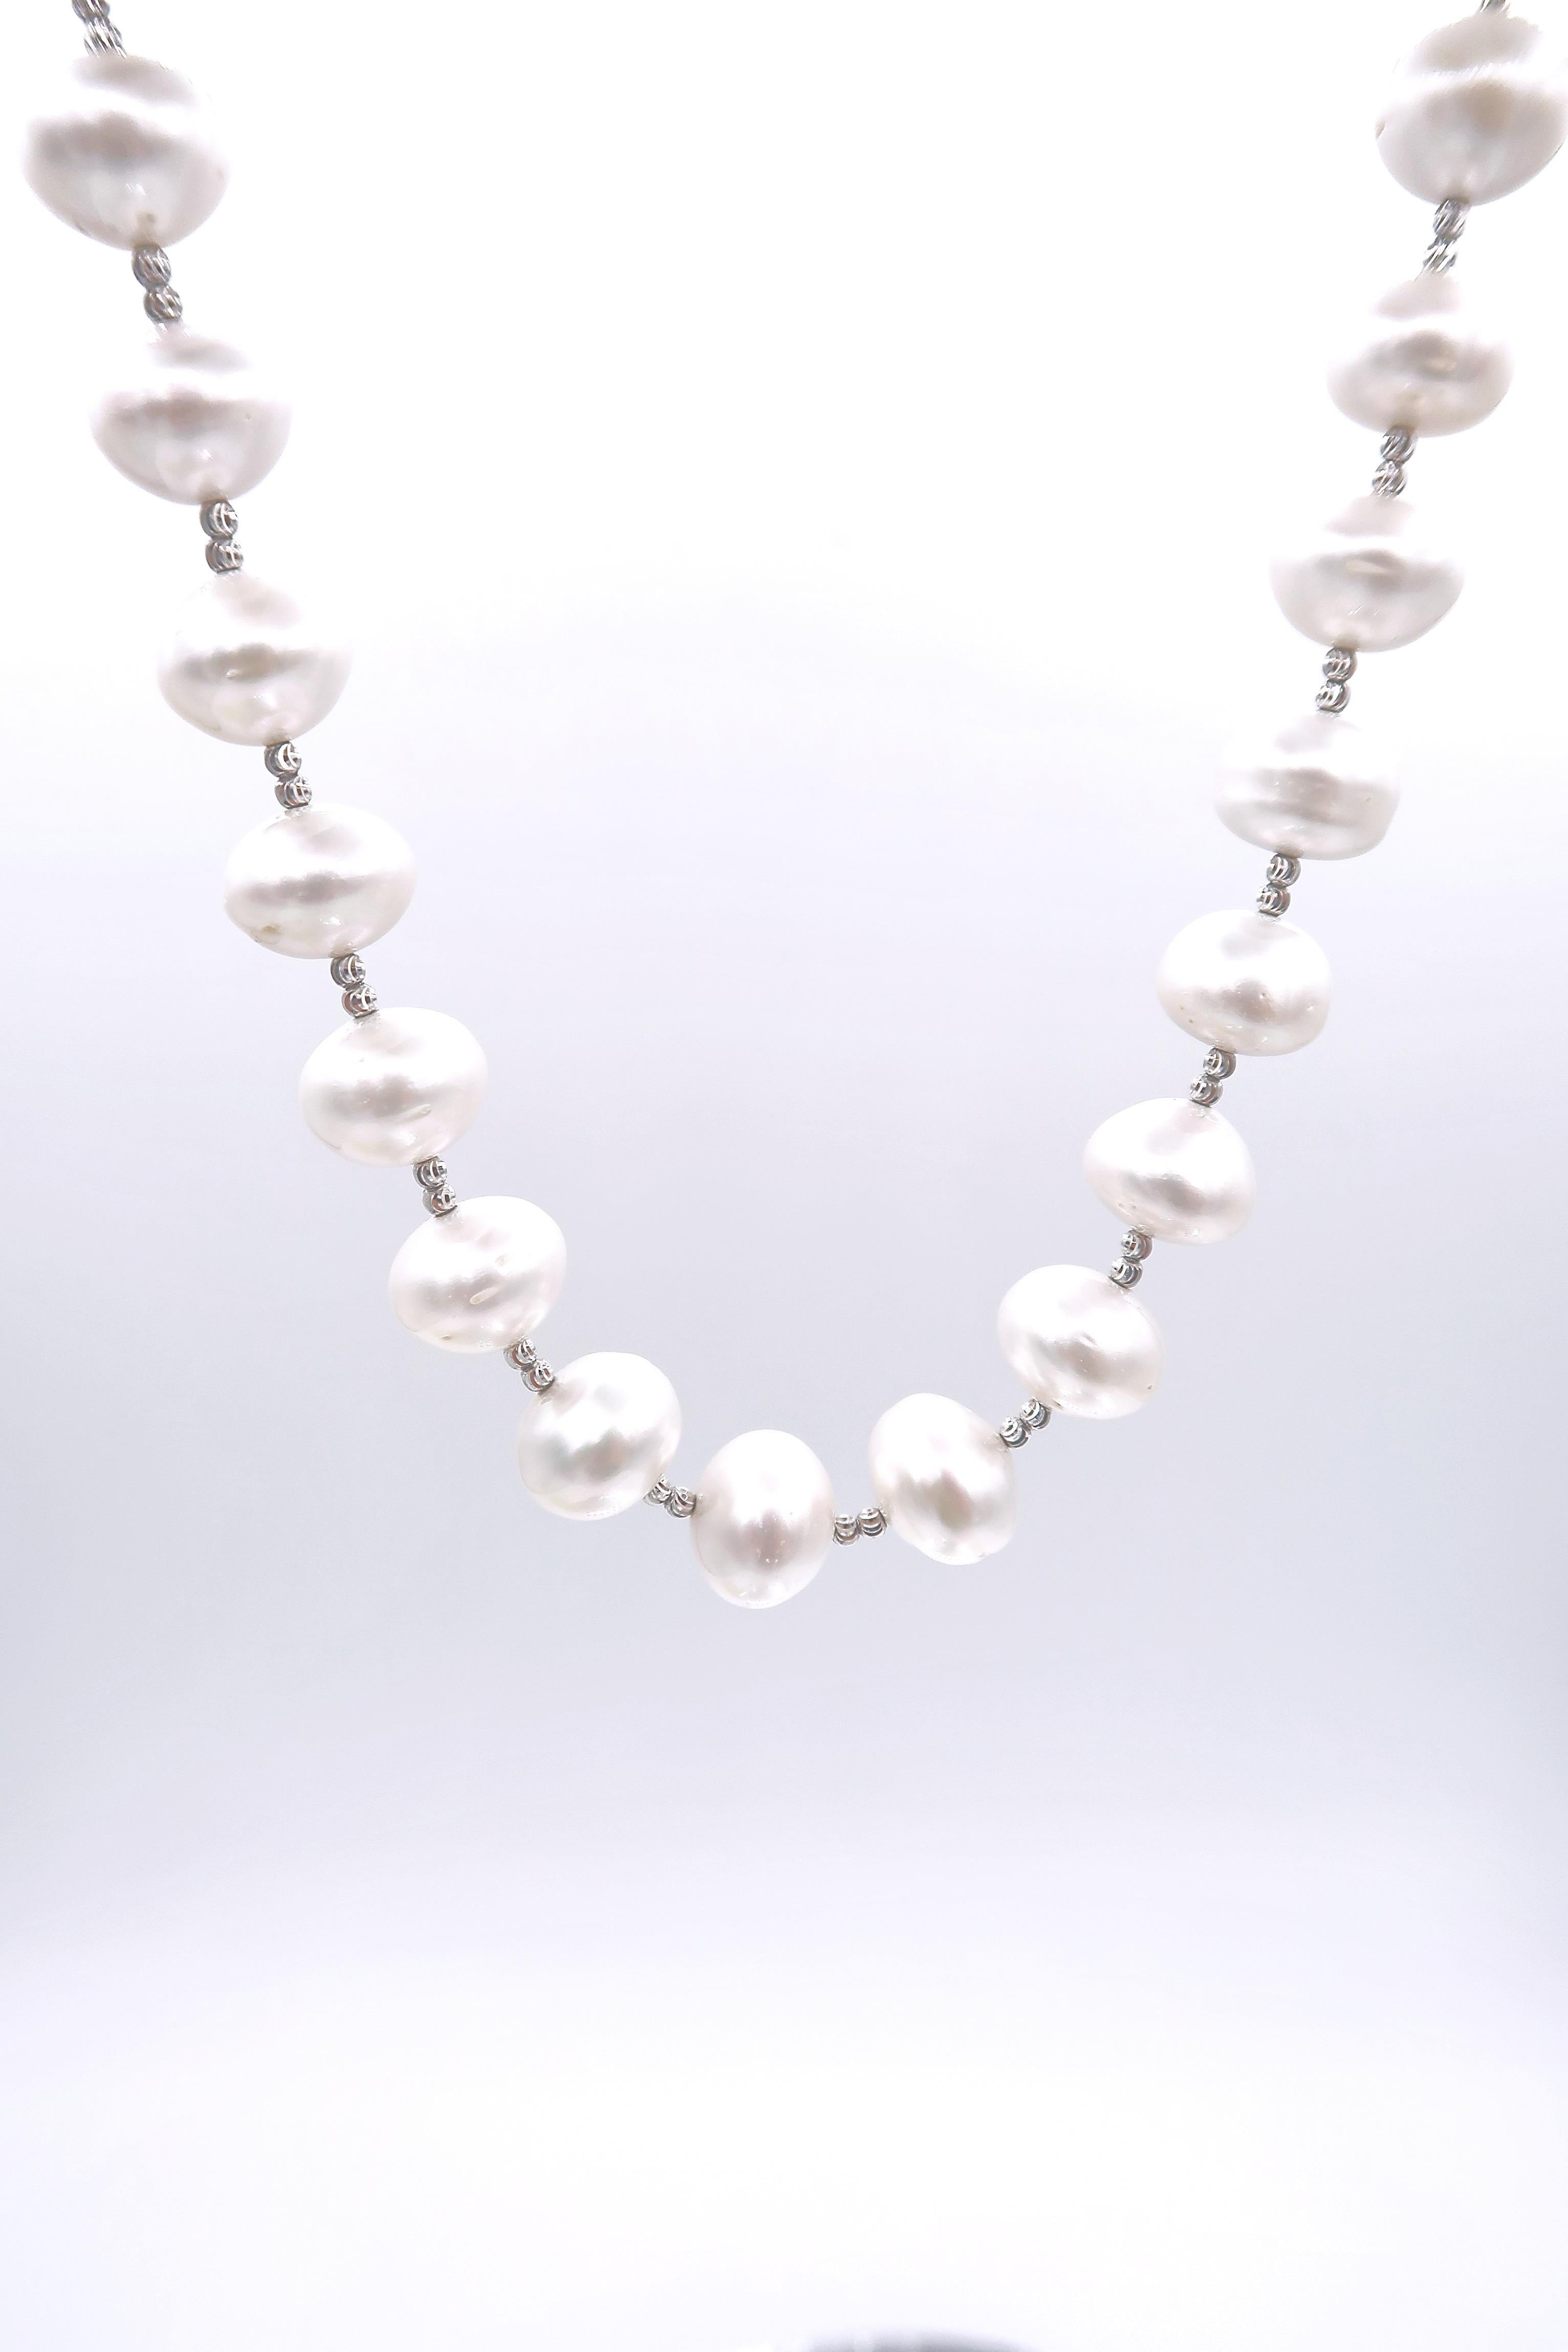 Contemporary BOON 22 inch White South Sea Pearl Strand Necklace White Gold Beads